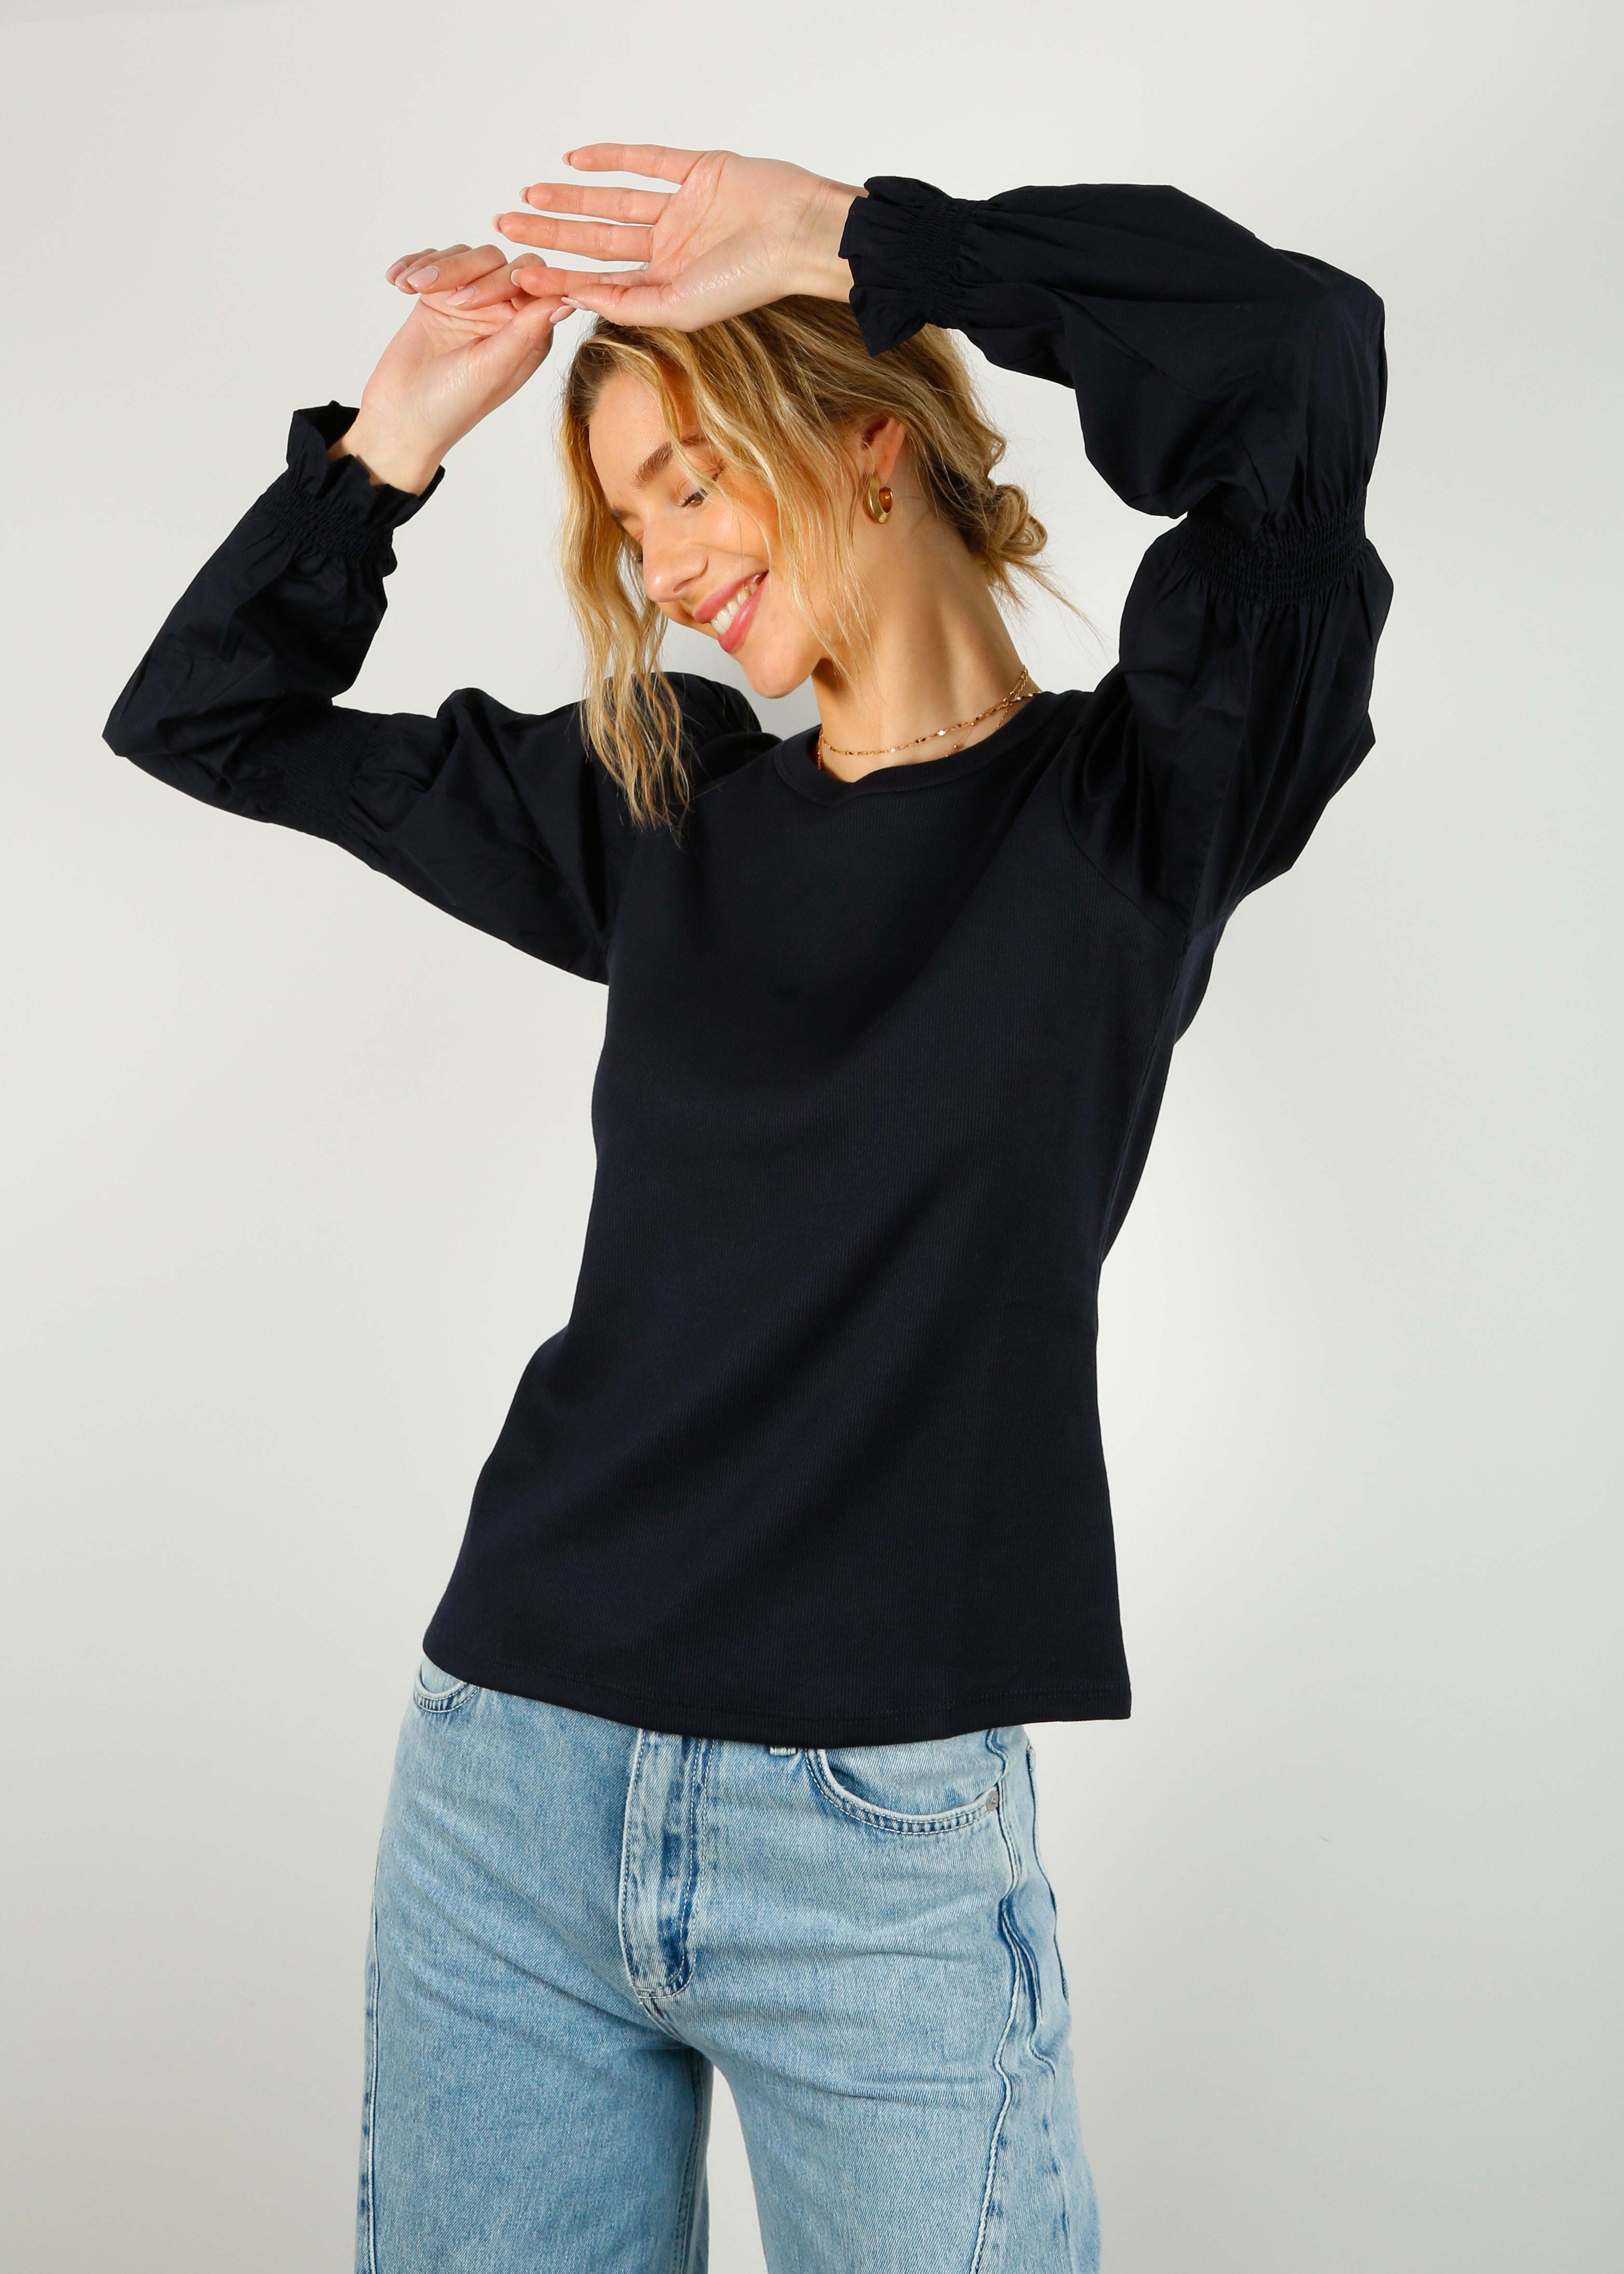 VB Fawn Top in Navy